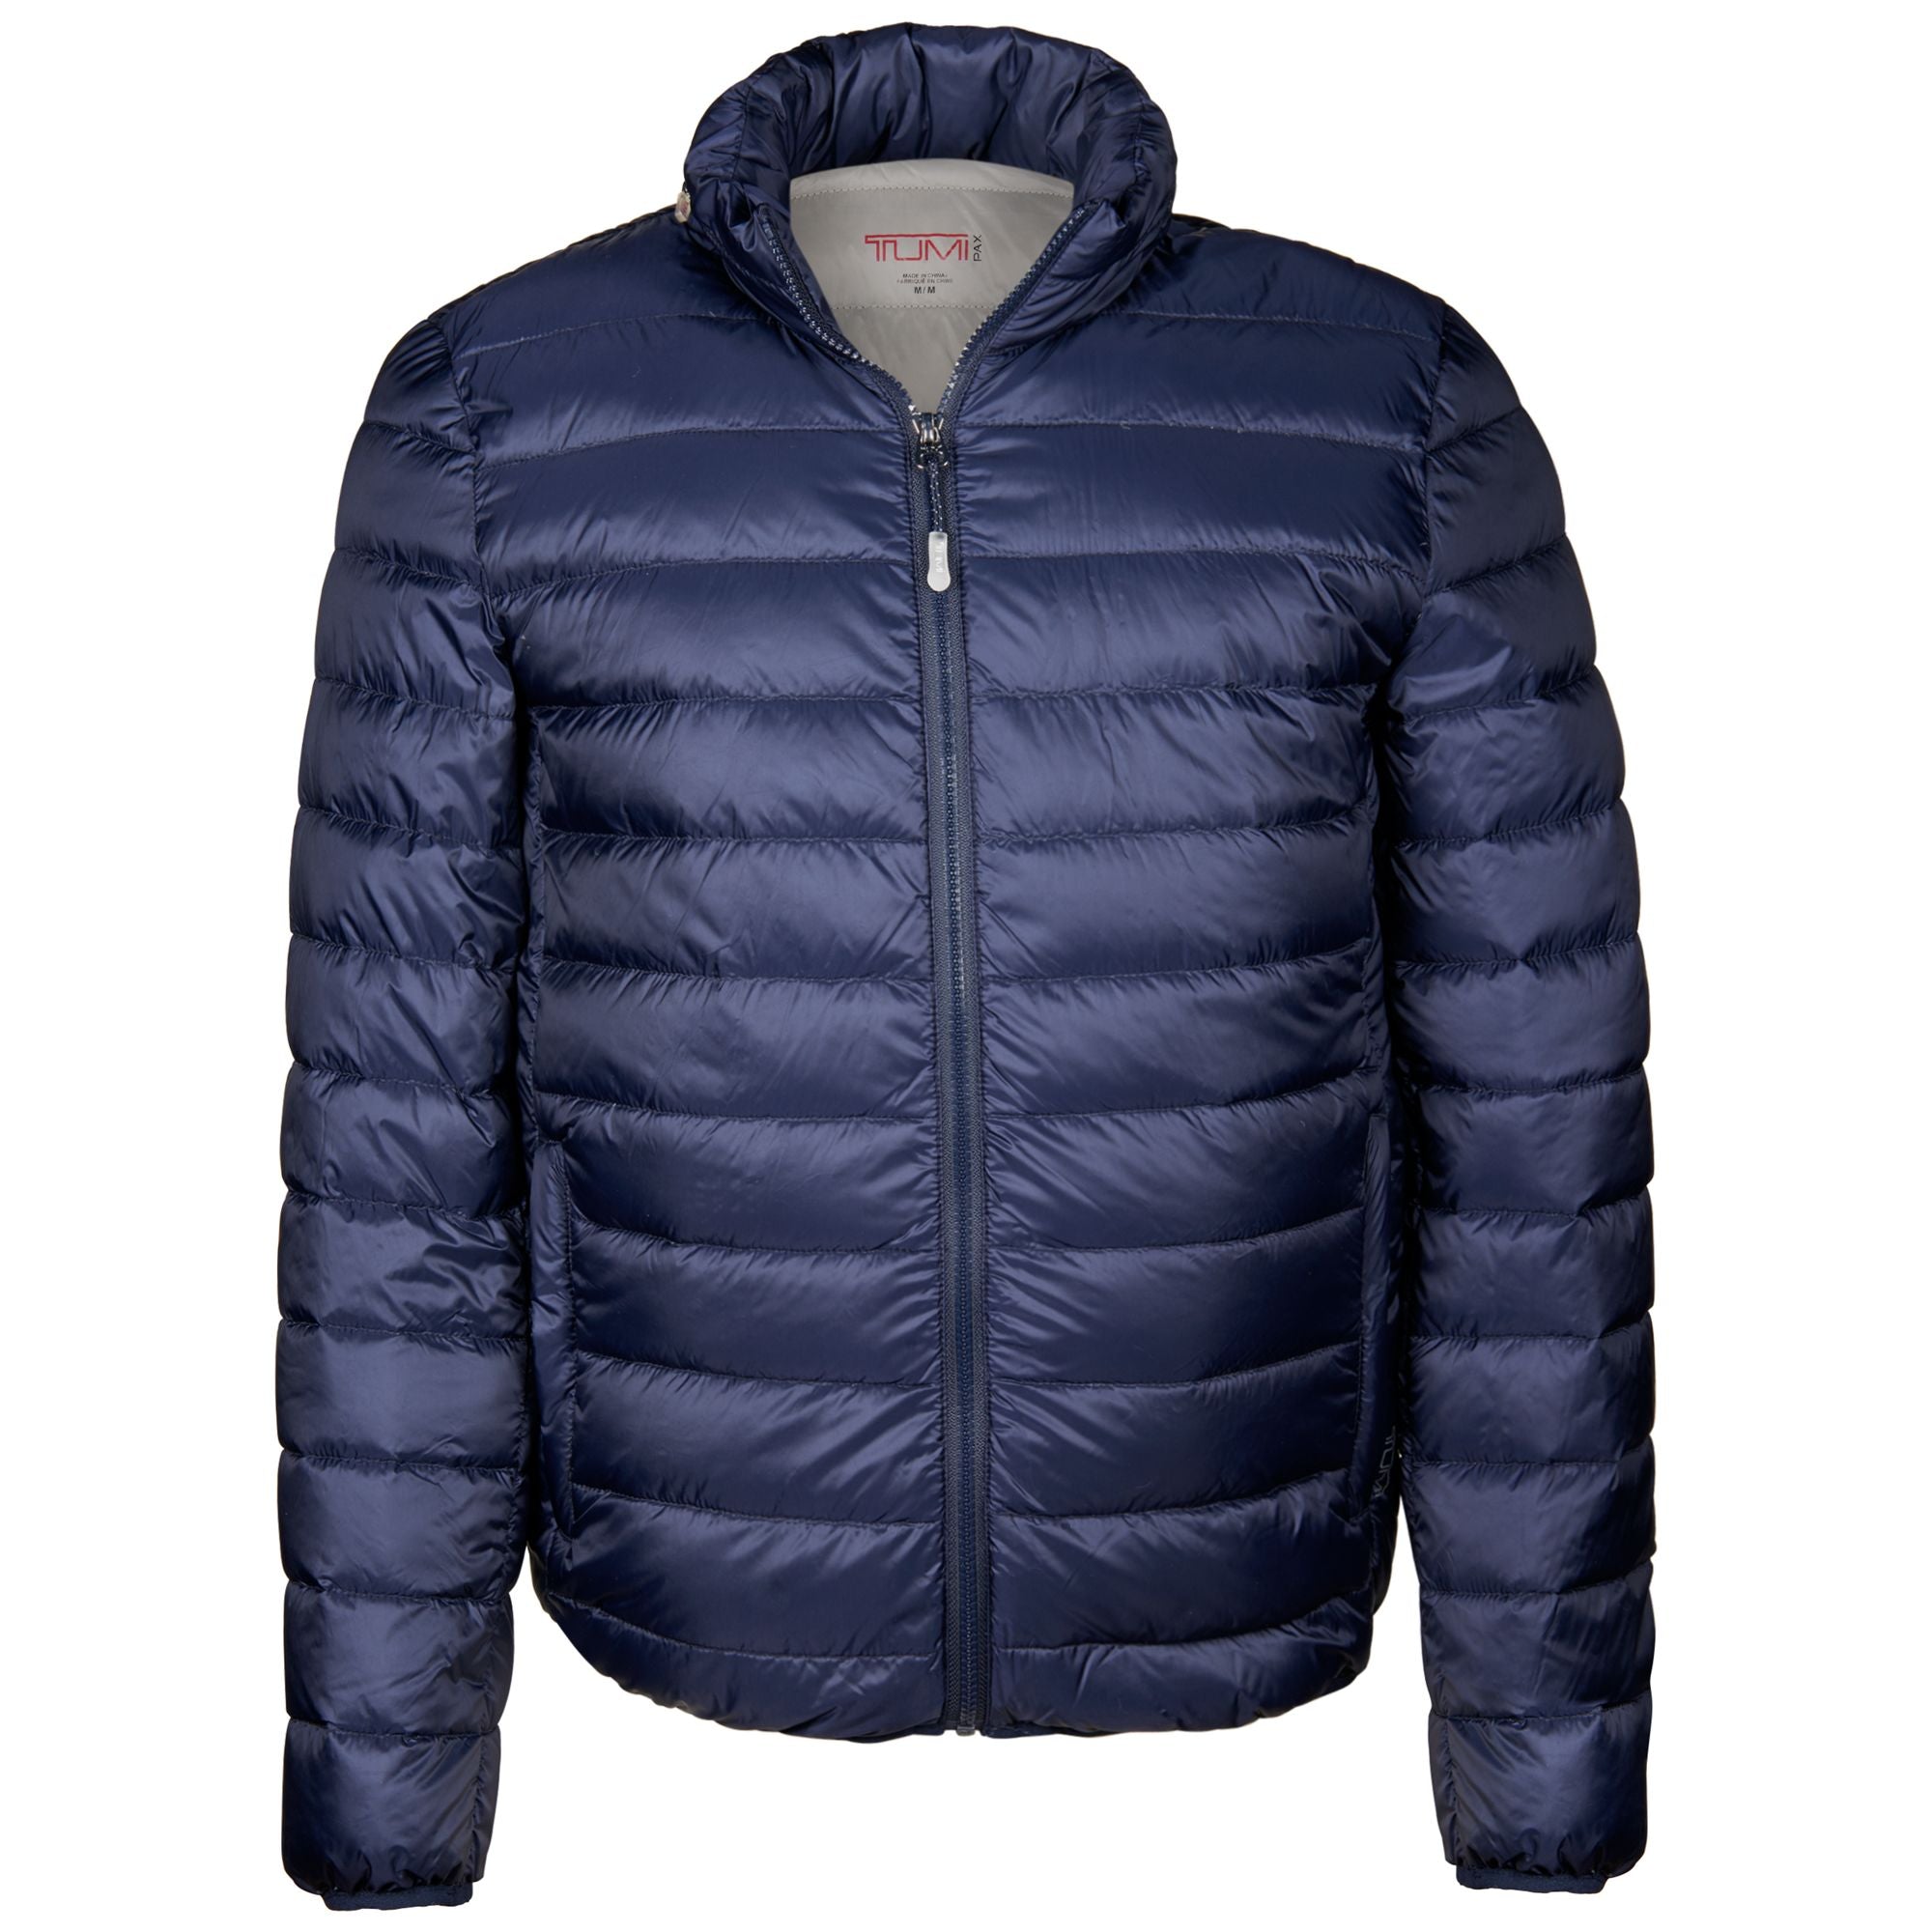 TUMI PAX Men's Patrol Packable Travel Puffer Jacket – Luggage Online